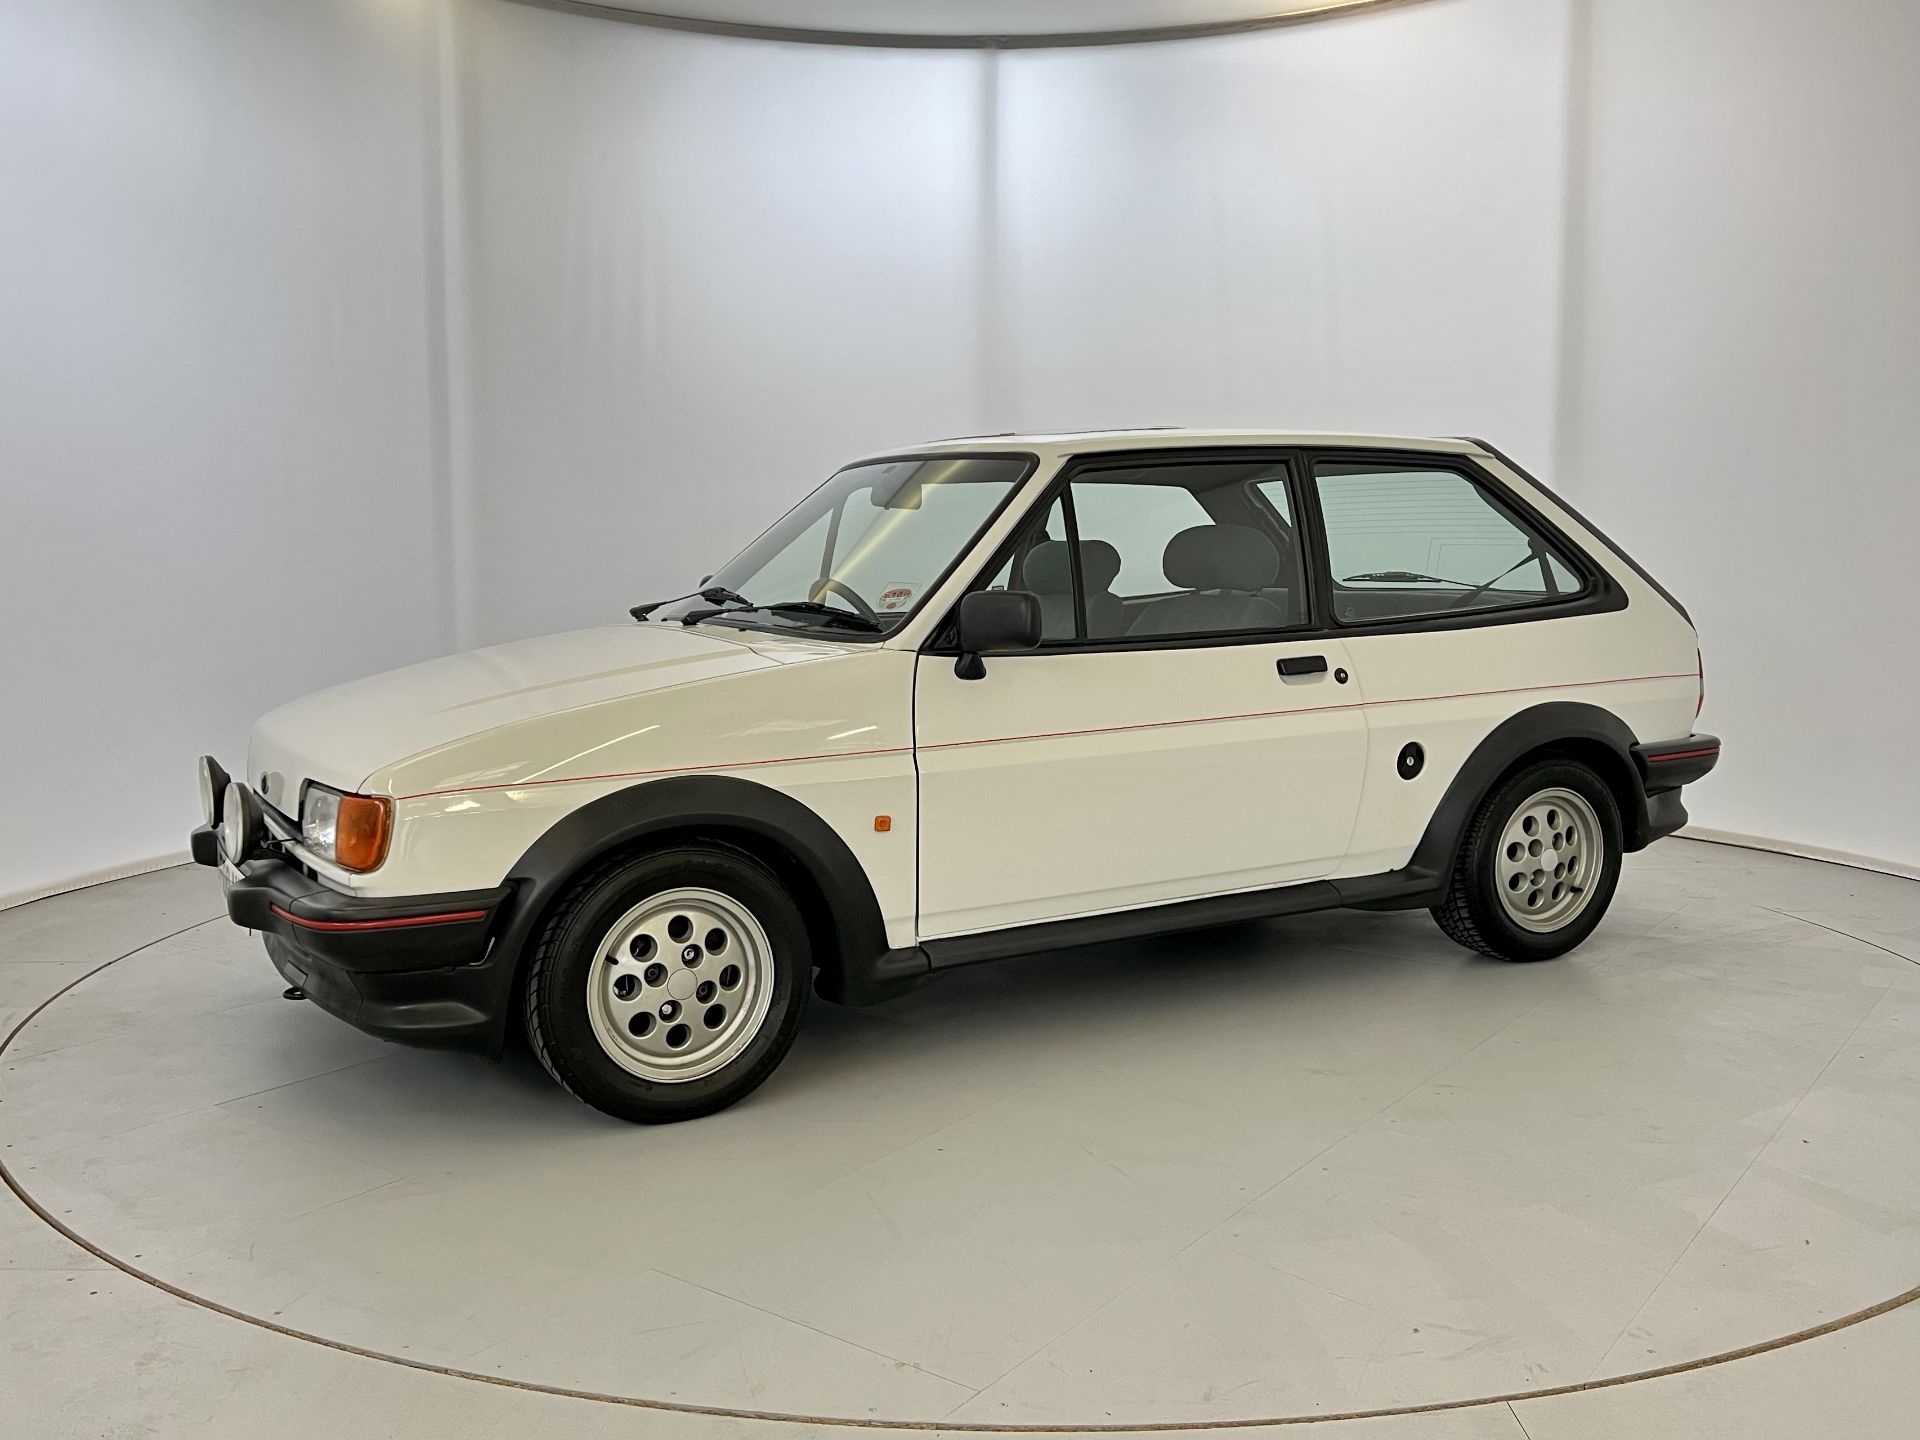 Ford Fiesta XR2 - Image 4 of 37